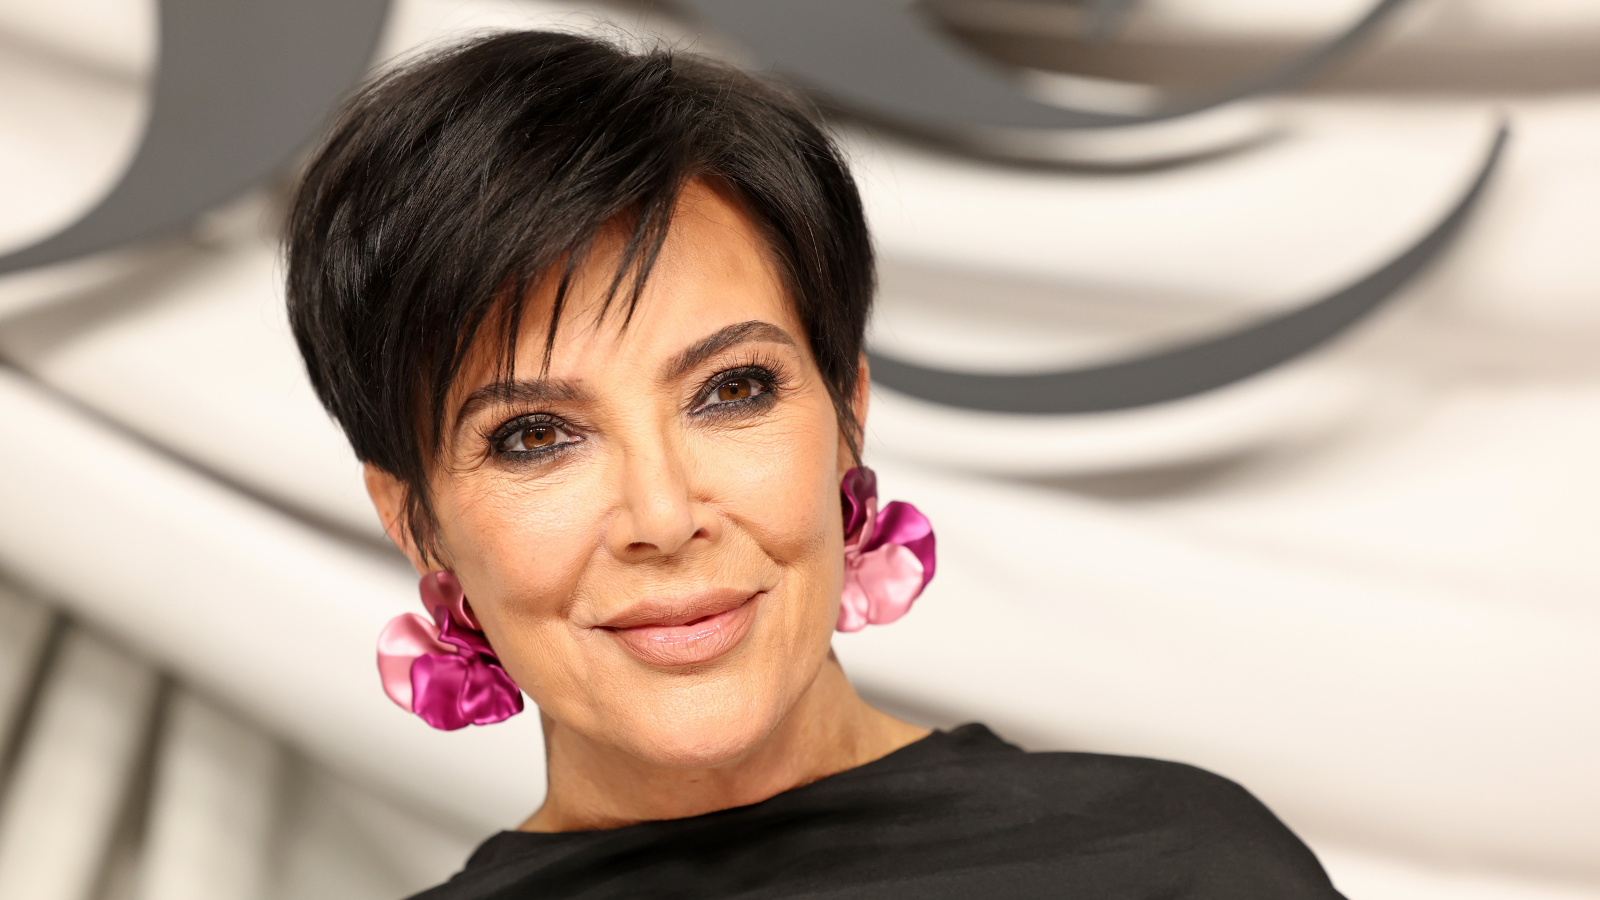 The Toaster Kris Jenner Is Shopping This Prime Day Is Only $27